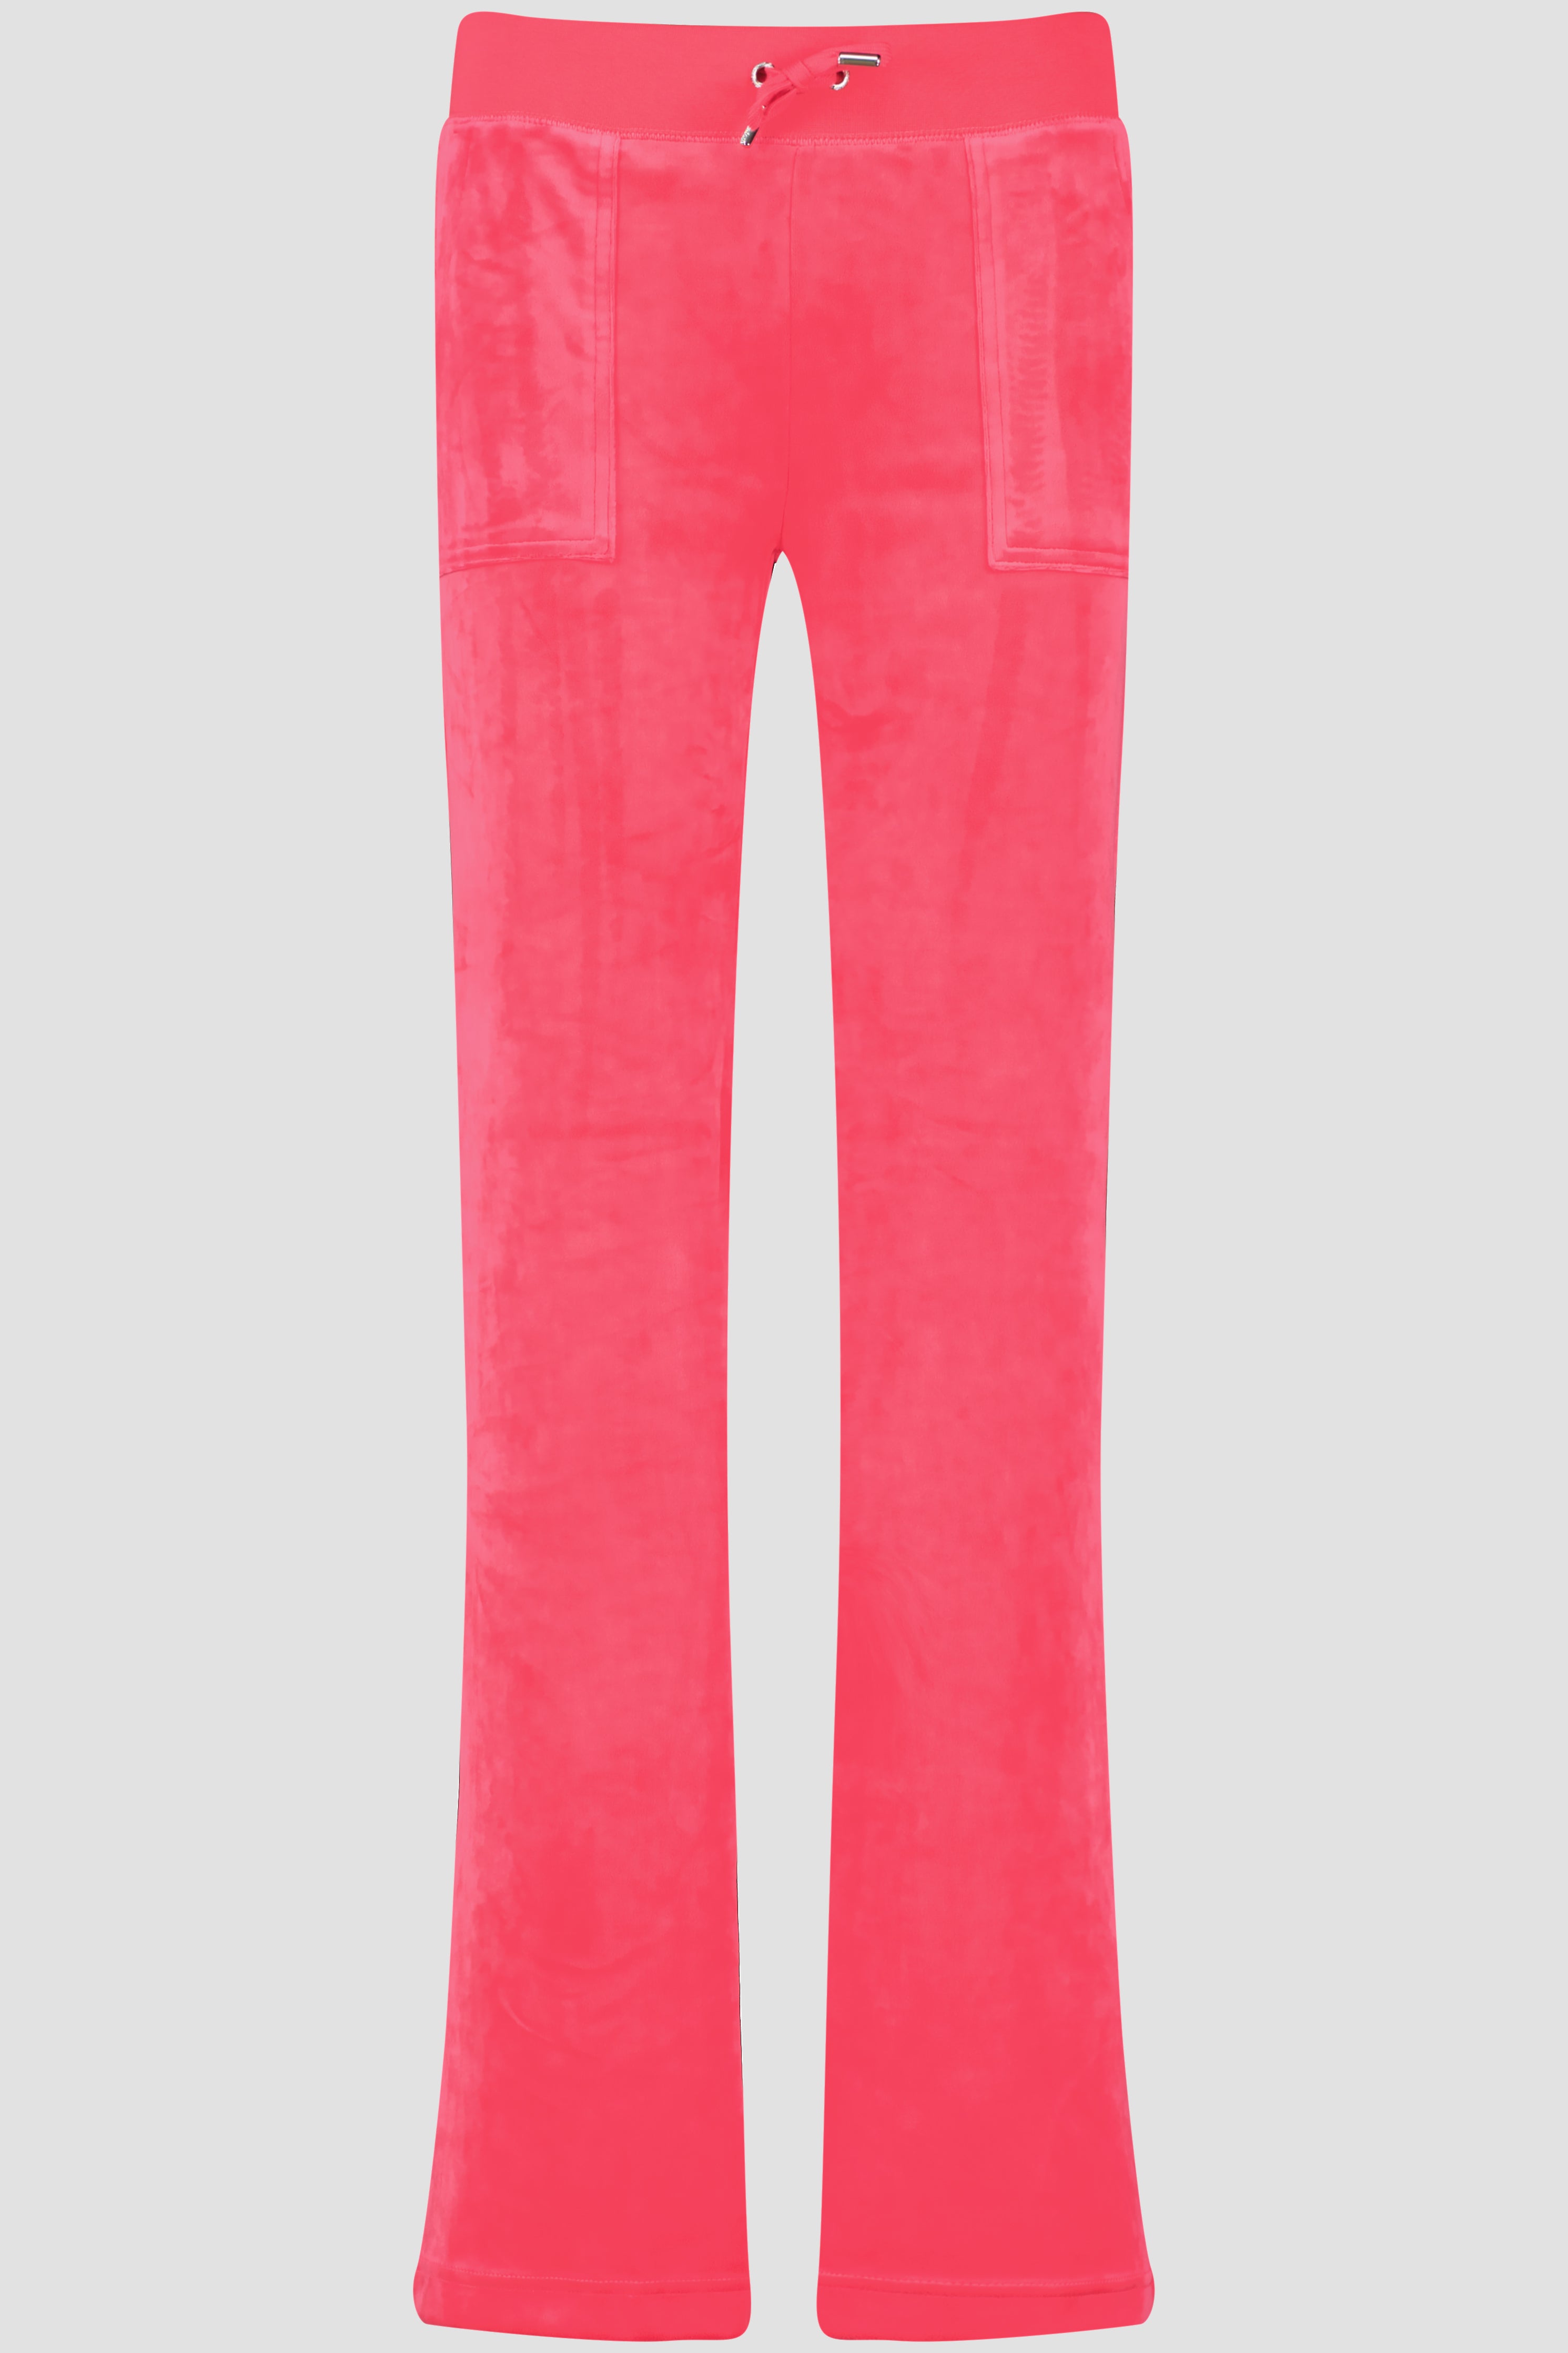 Women's Juicy Couture Del Ray Pink Glo Straight Leg Track Pants